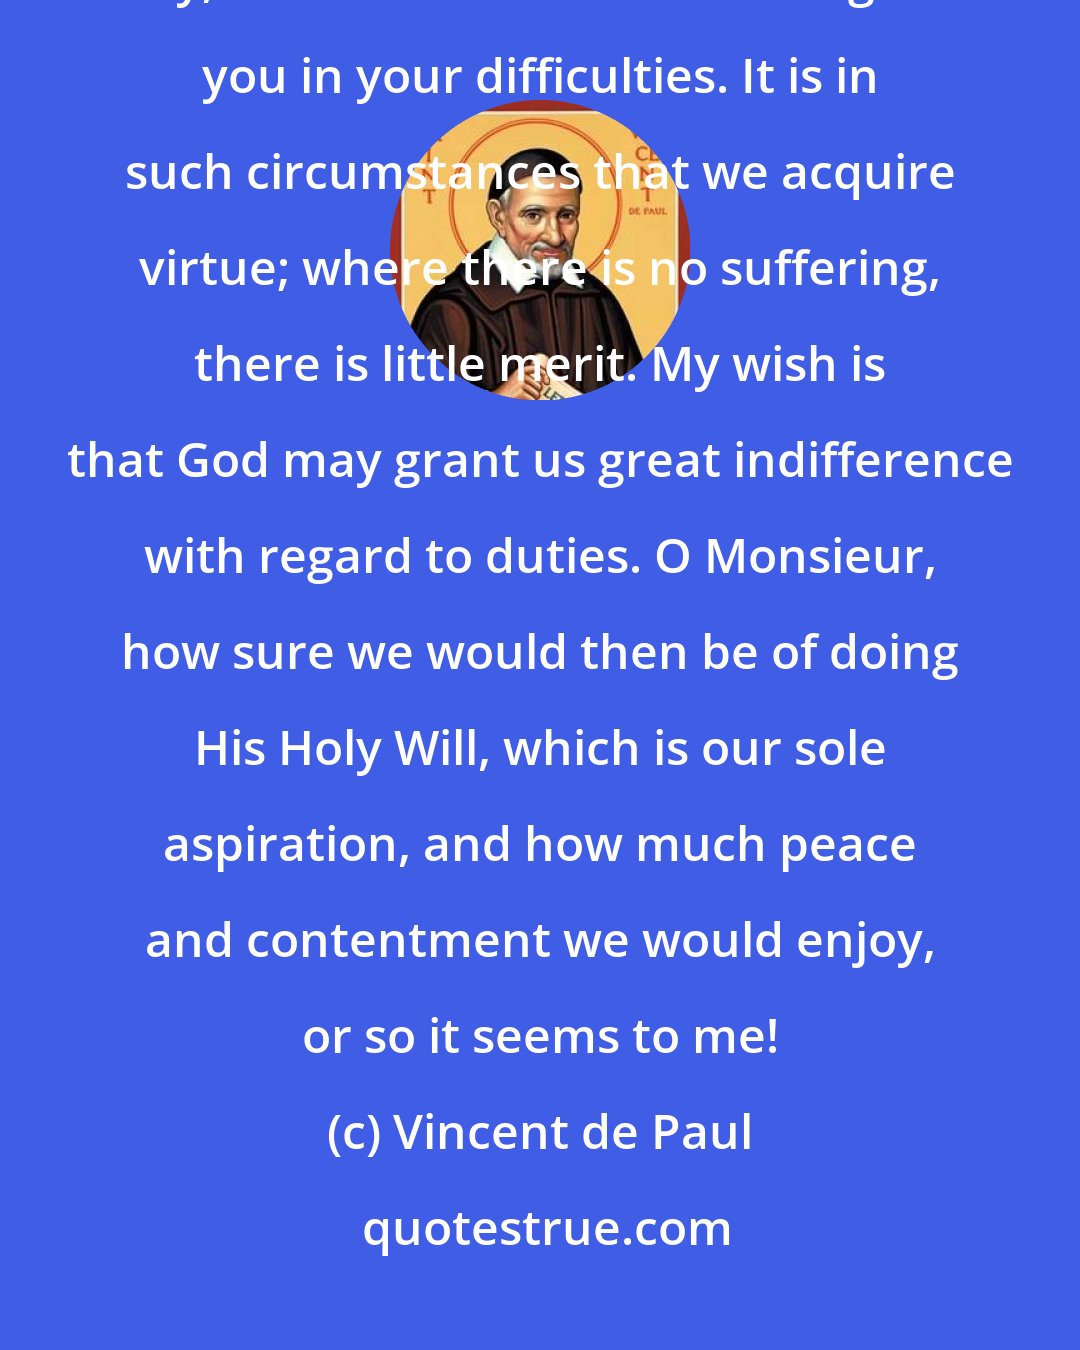 Vincent de Paul: I know well, Monsieur, how much you have to endure in your present duty, and I ask Our Lord to strengthen you in your difficulties. It is in such circumstances that we acquire virtue; where there is no suffering, there is little merit. My wish is that God may grant us great indifference with regard to duties. O Monsieur, how sure we would then be of doing His Holy Will, which is our sole aspiration, and how much peace and contentment we would enjoy, or so it seems to me!